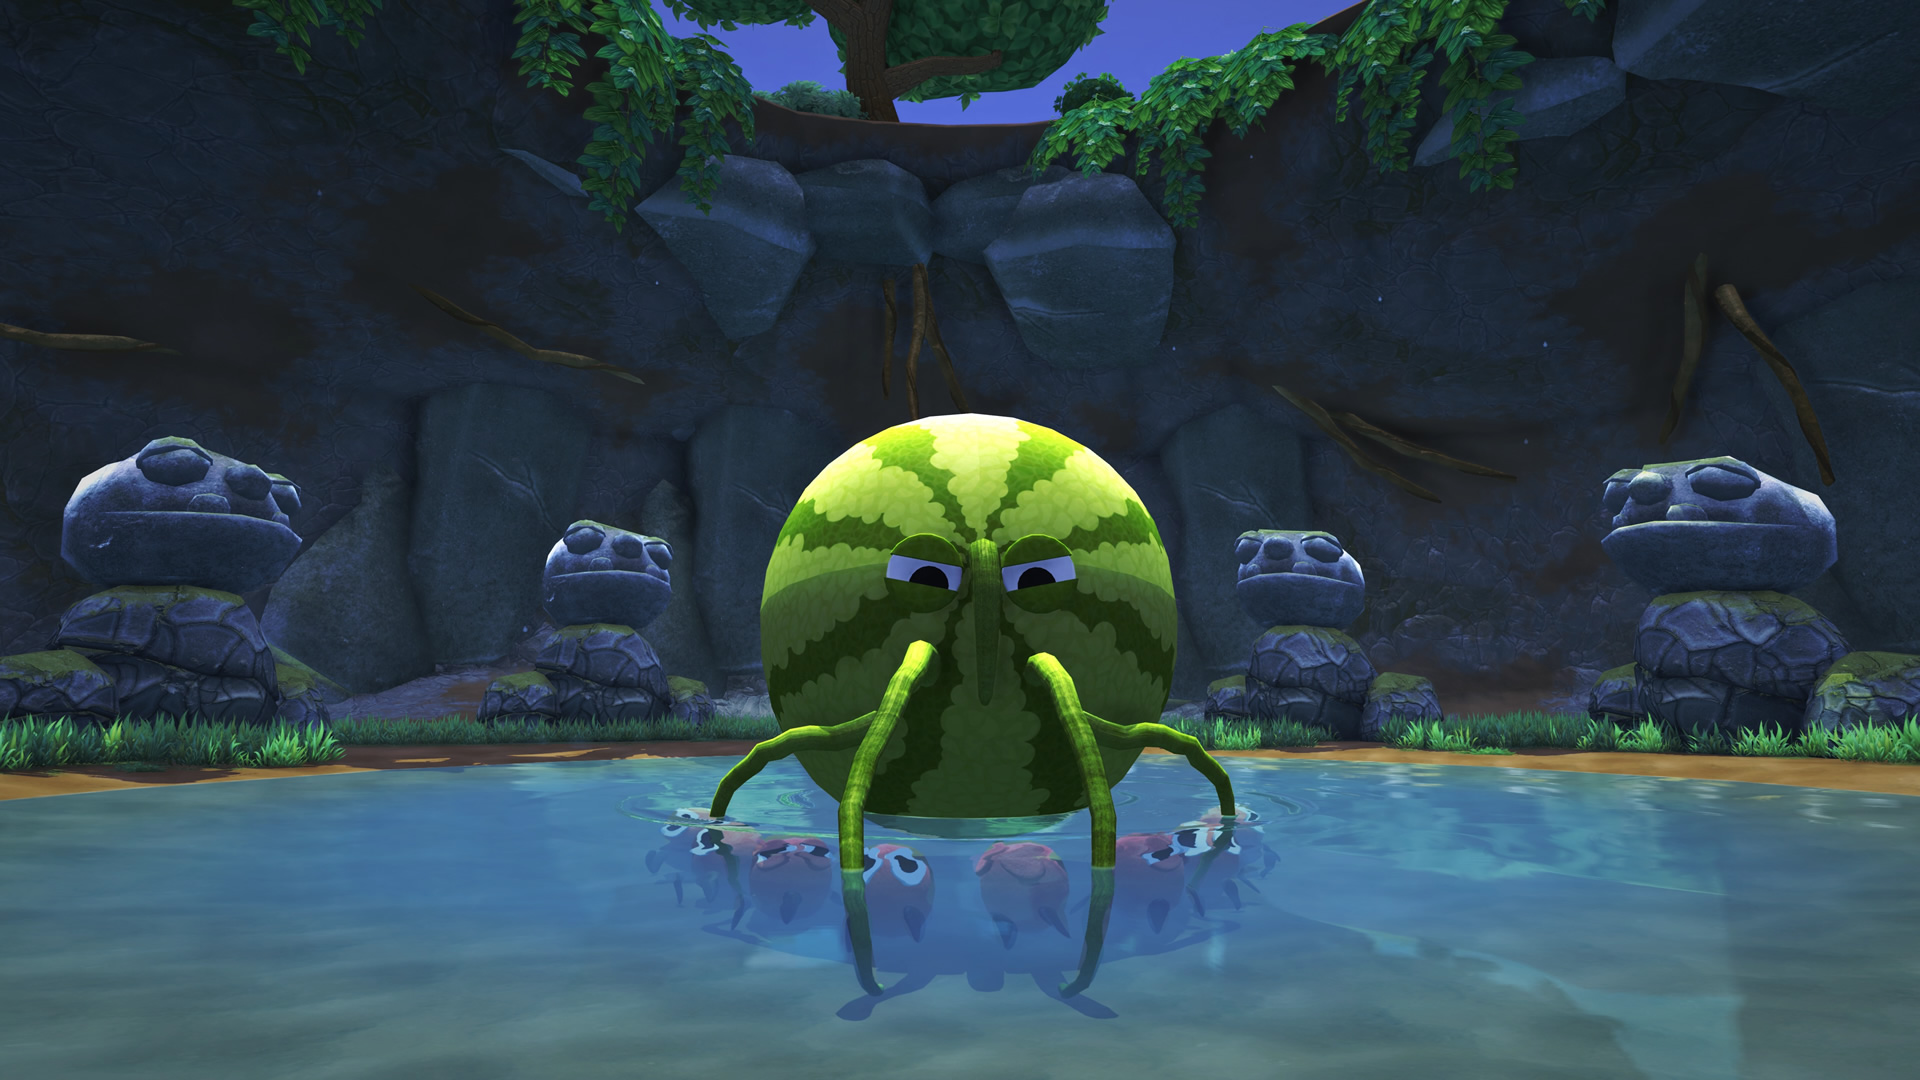 A stone cavern with stone statues encircling a pool of water with an angry looking watermelon bugsnack holding tiny red bugsnax under the water